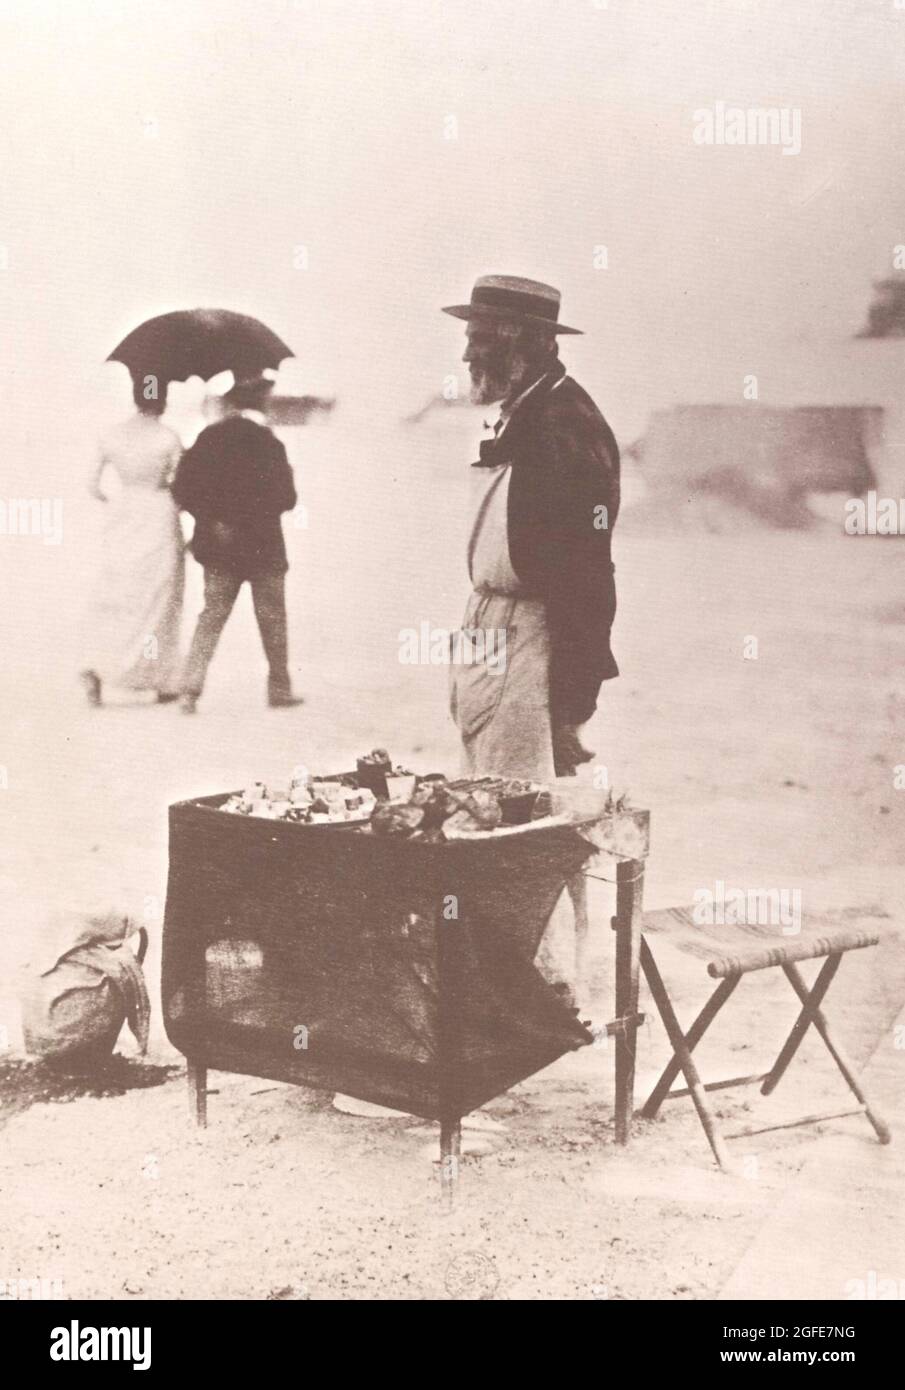 Eugène Atget french flâneur - early photography - Life and the working world - nougat sales - salesman Stock Photo